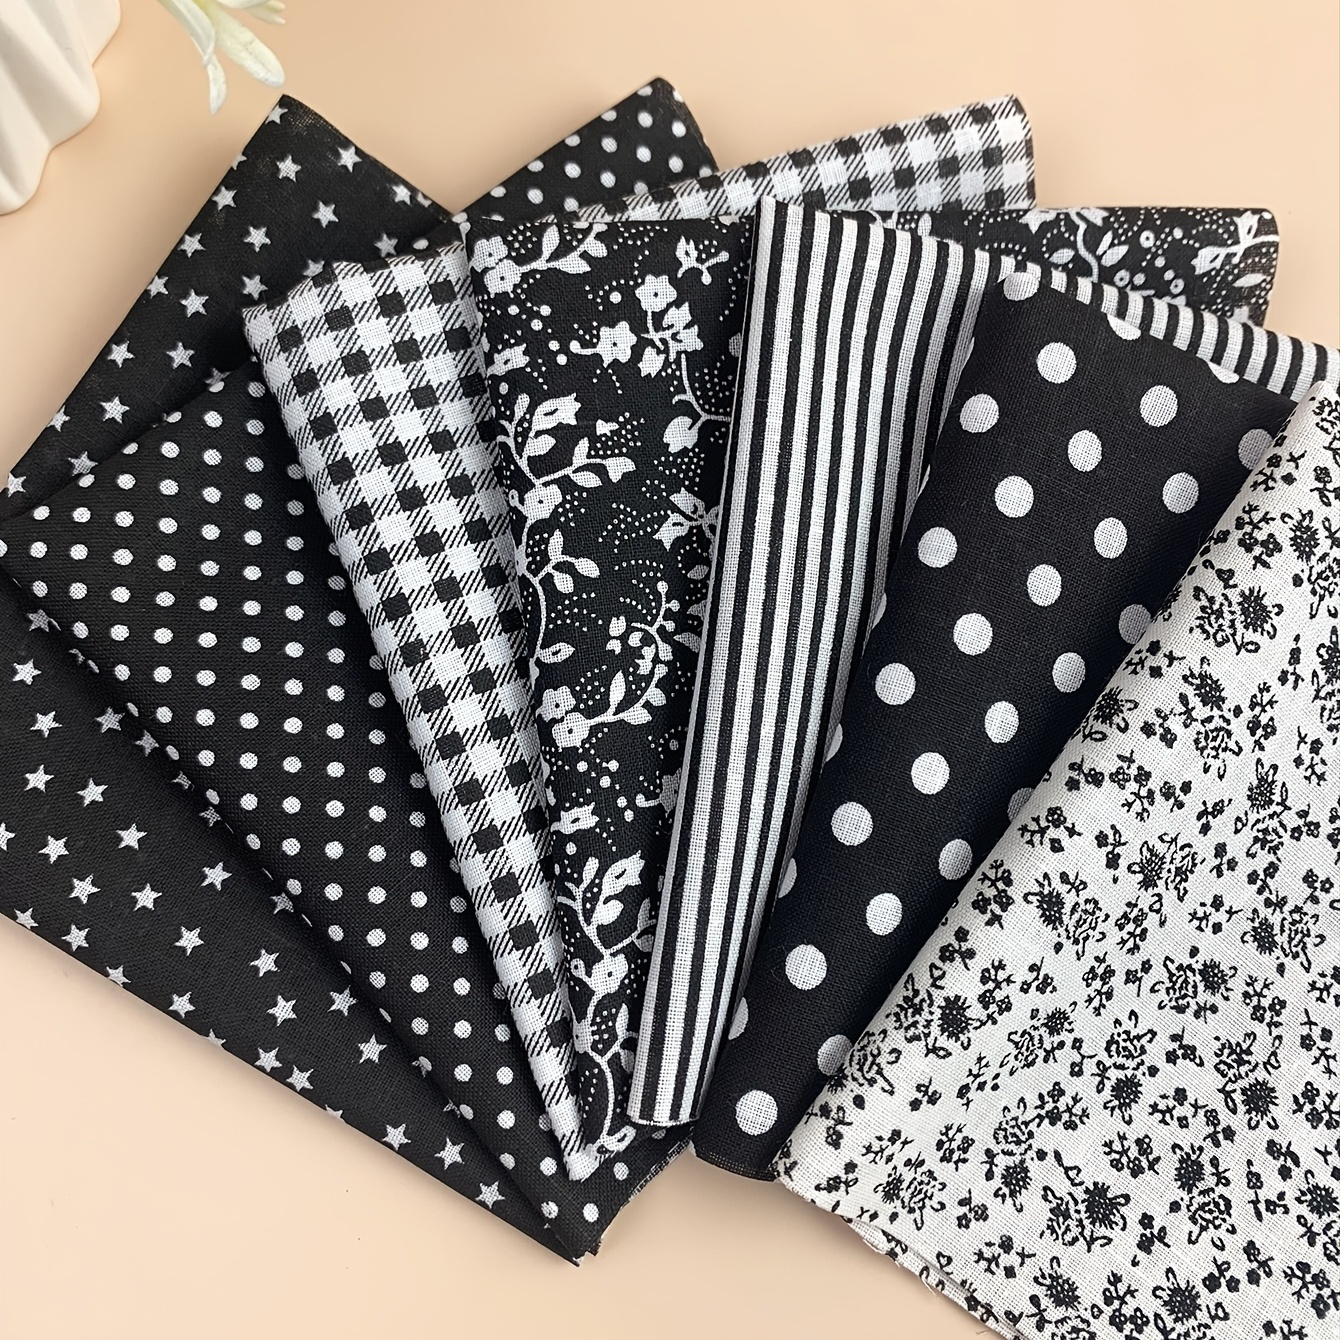 7pcs/set Gray Cotton Fabric For Sewing Quilting Fabric Floral Cotton Craft  Fabric Bundle Squares Fabric DIY Cloths Patchwork Pre-Cut Quilting Fabric